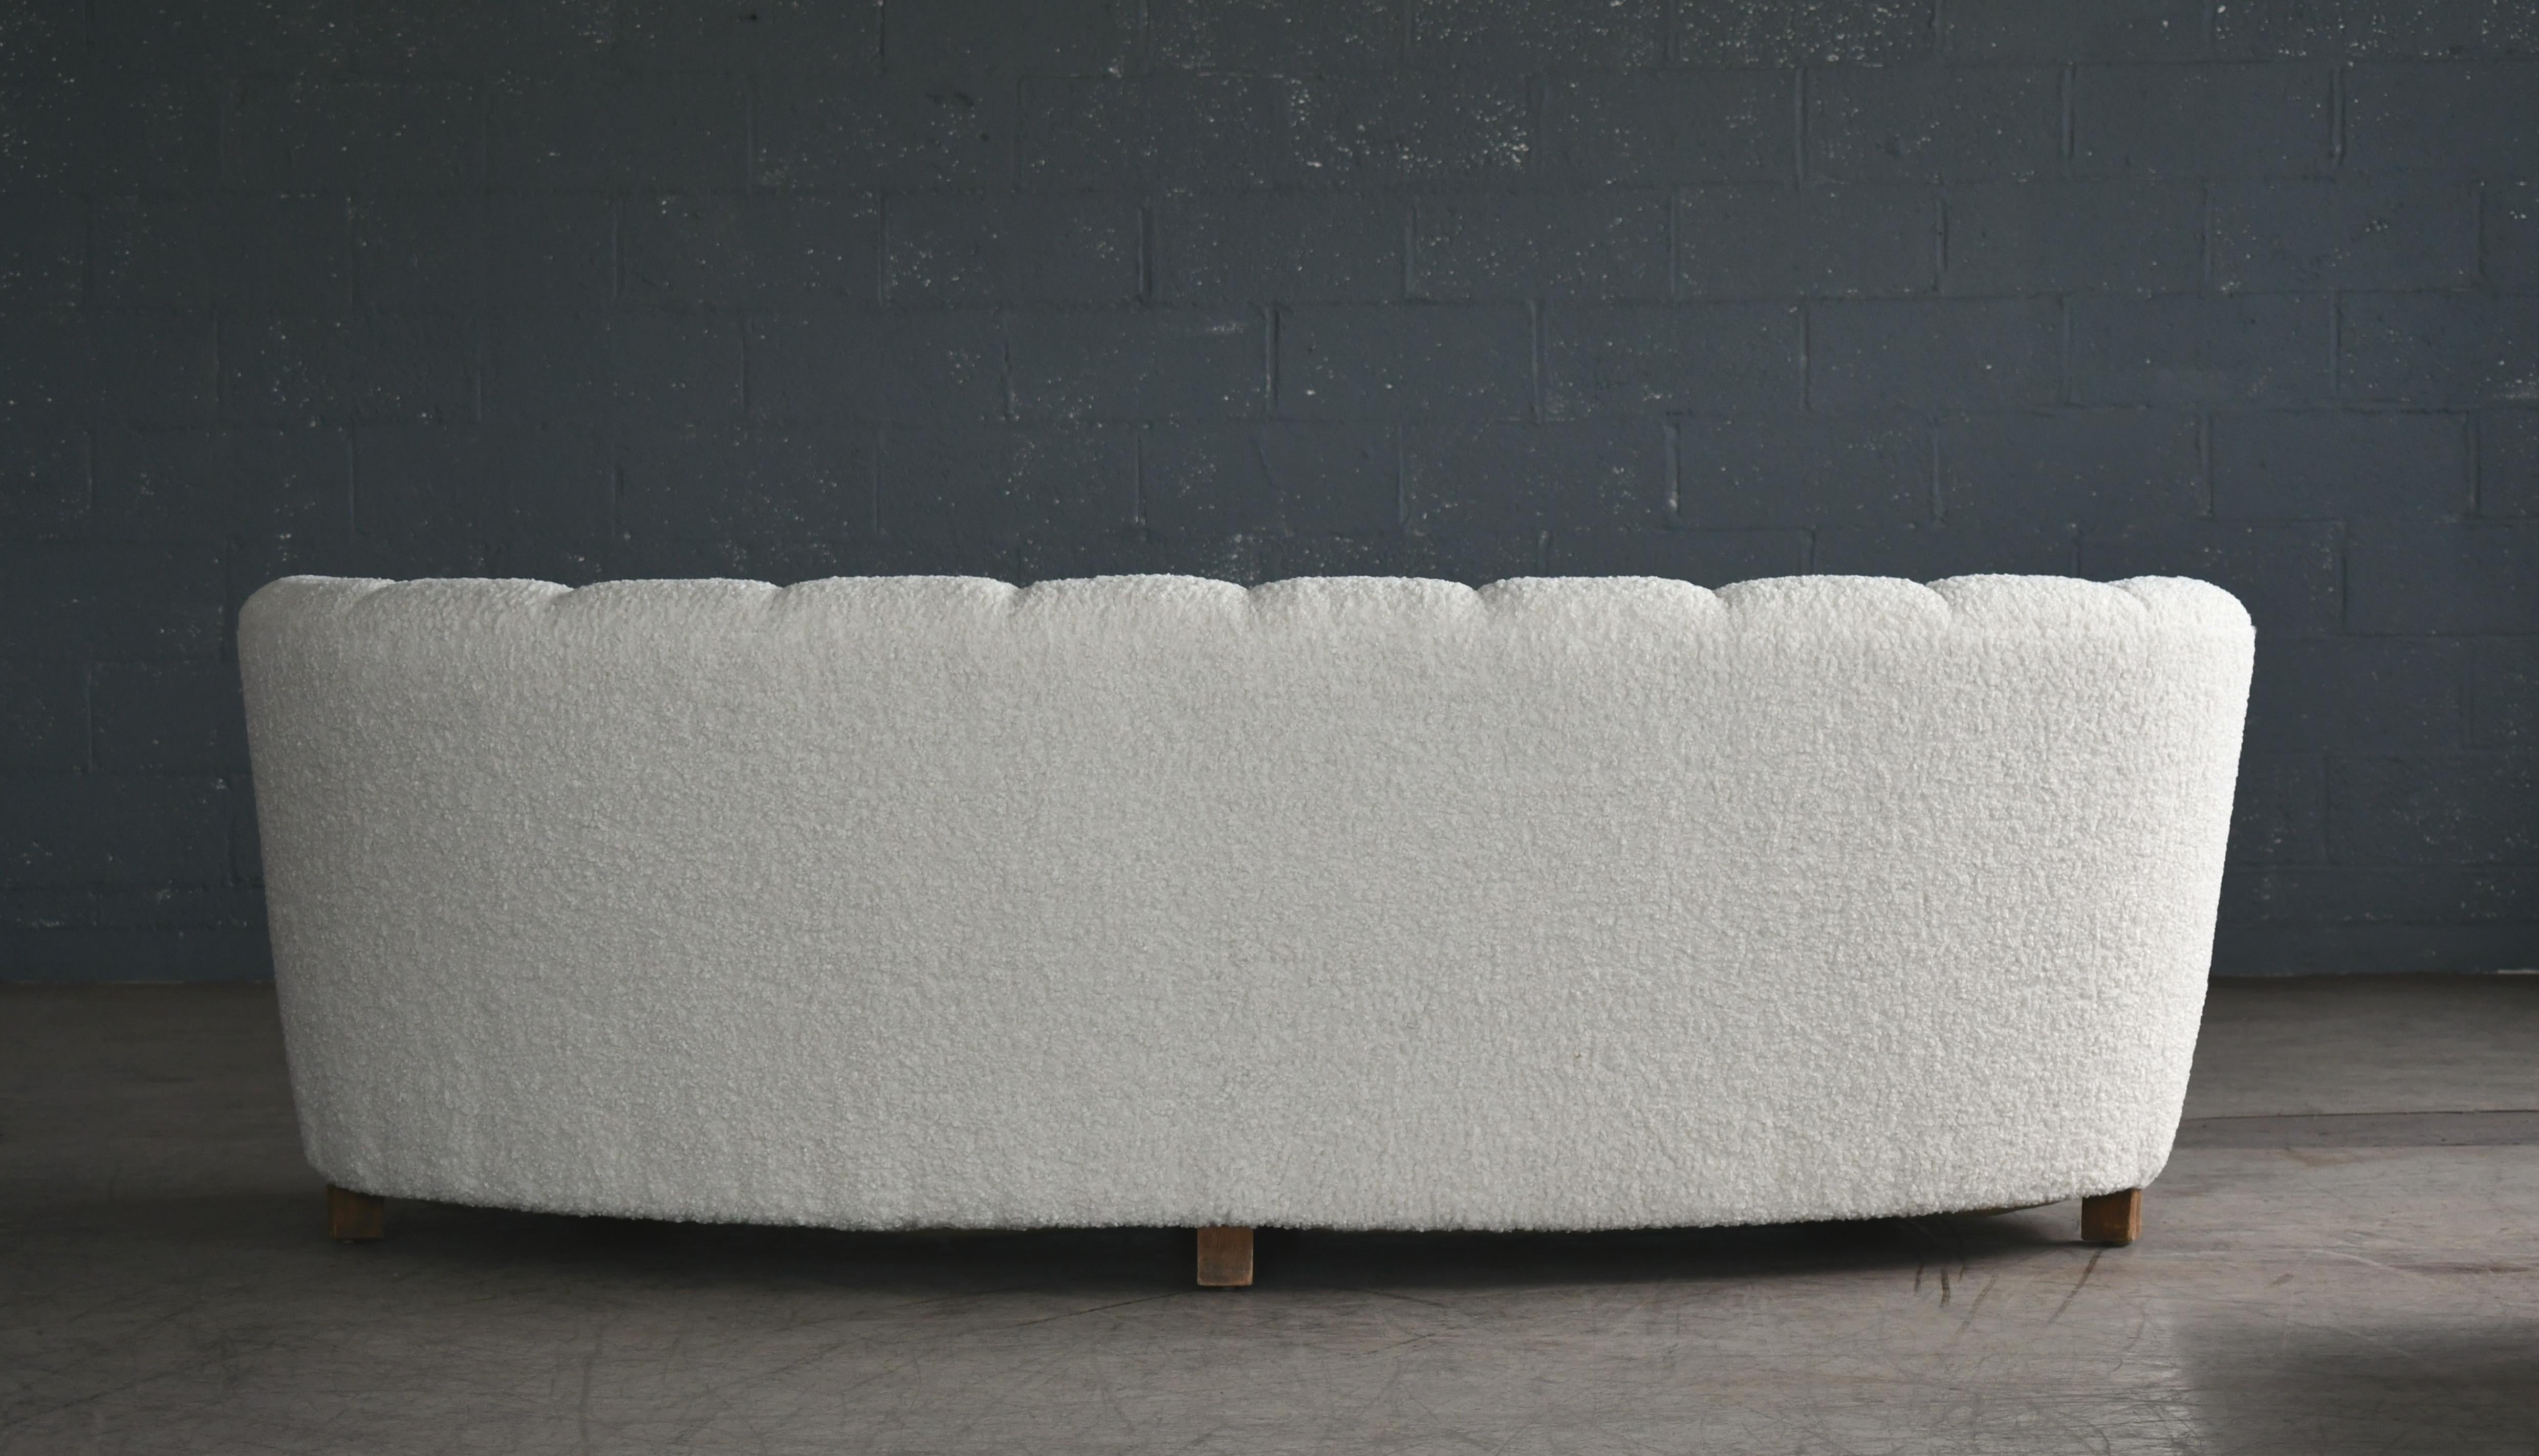 Beech Danish 1940s Large Curved Banana Shape Sofa Newly Re-Upholstered in White Boucle